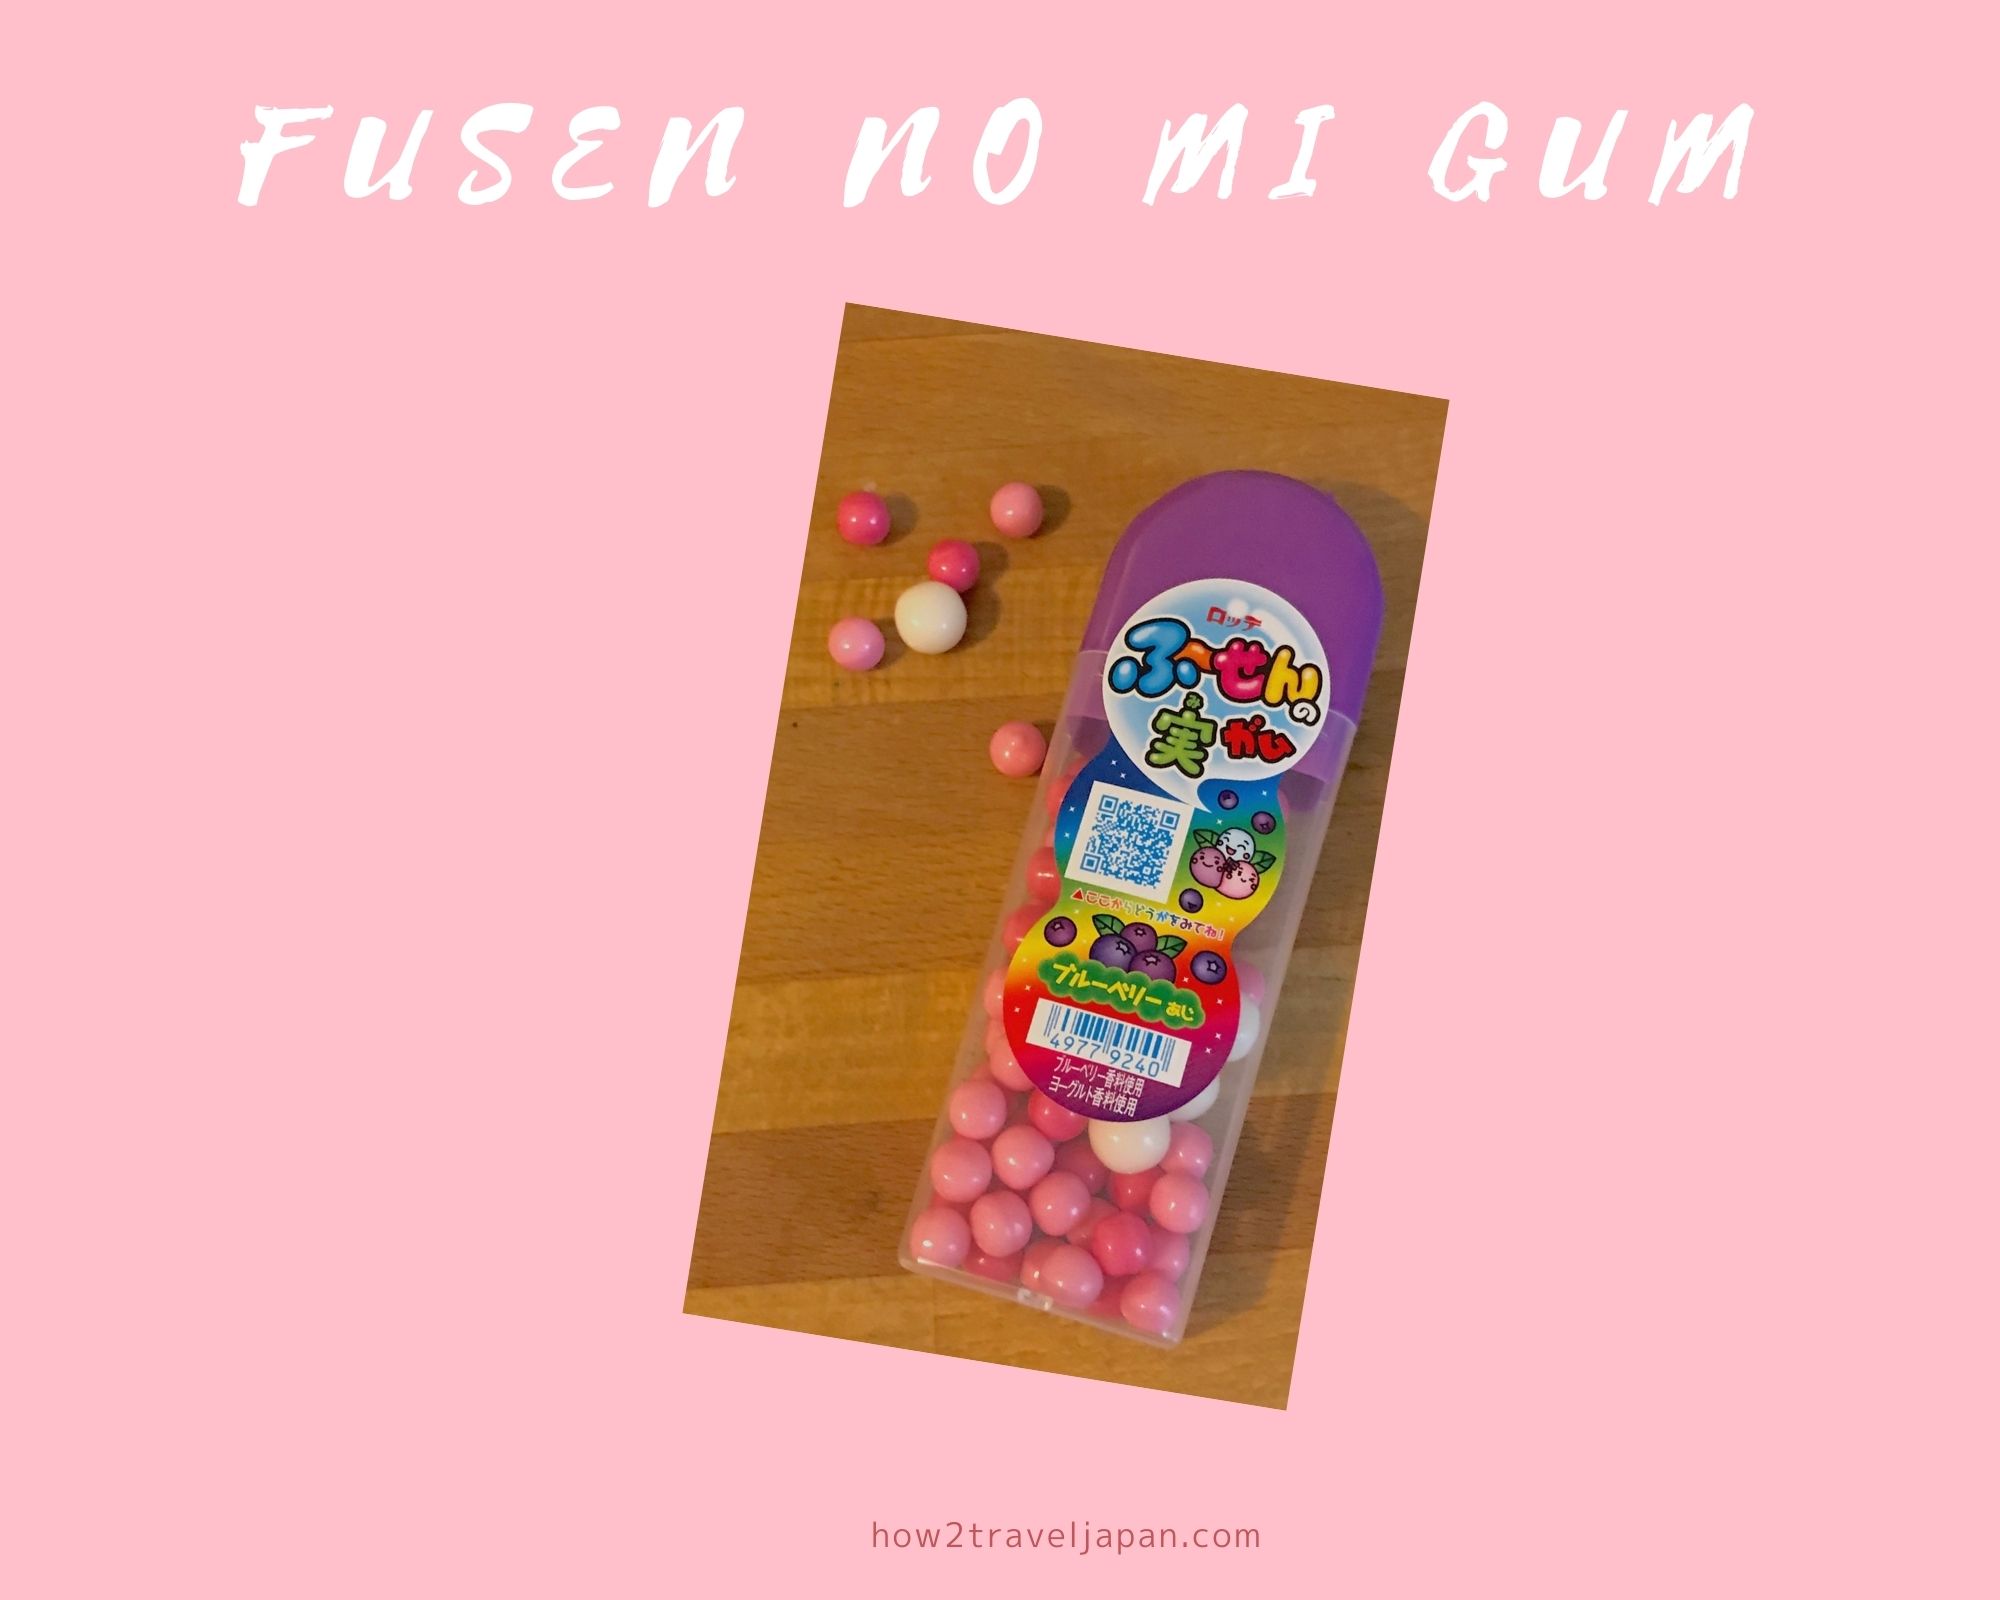 Read more about the article Fusennomi gum from Lotte